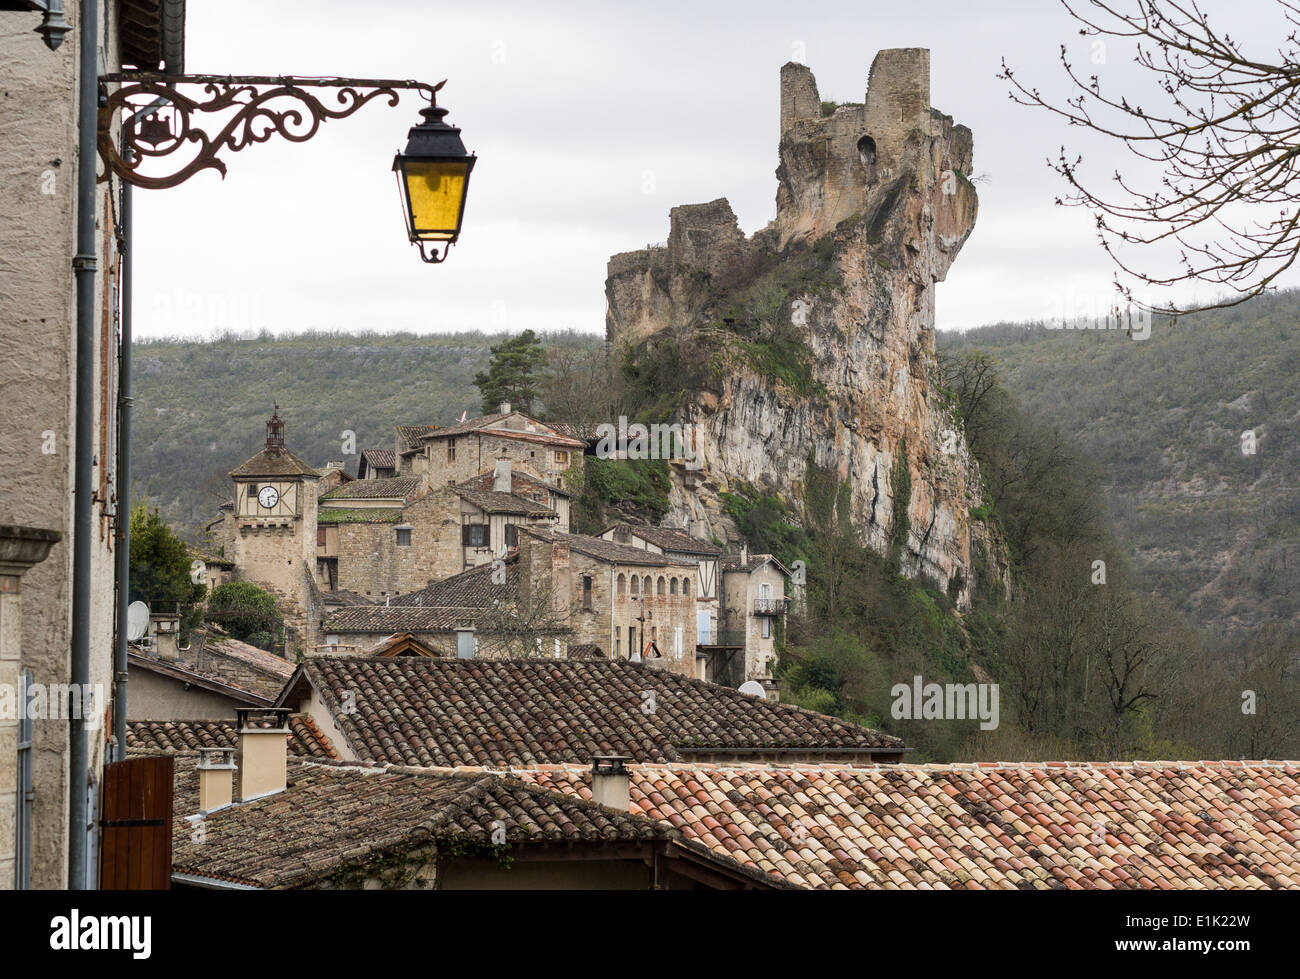 Rocky Perched Castle with street light. Penne Castle with the town below. Perched above the modern town, ancient fortification Stock Photo